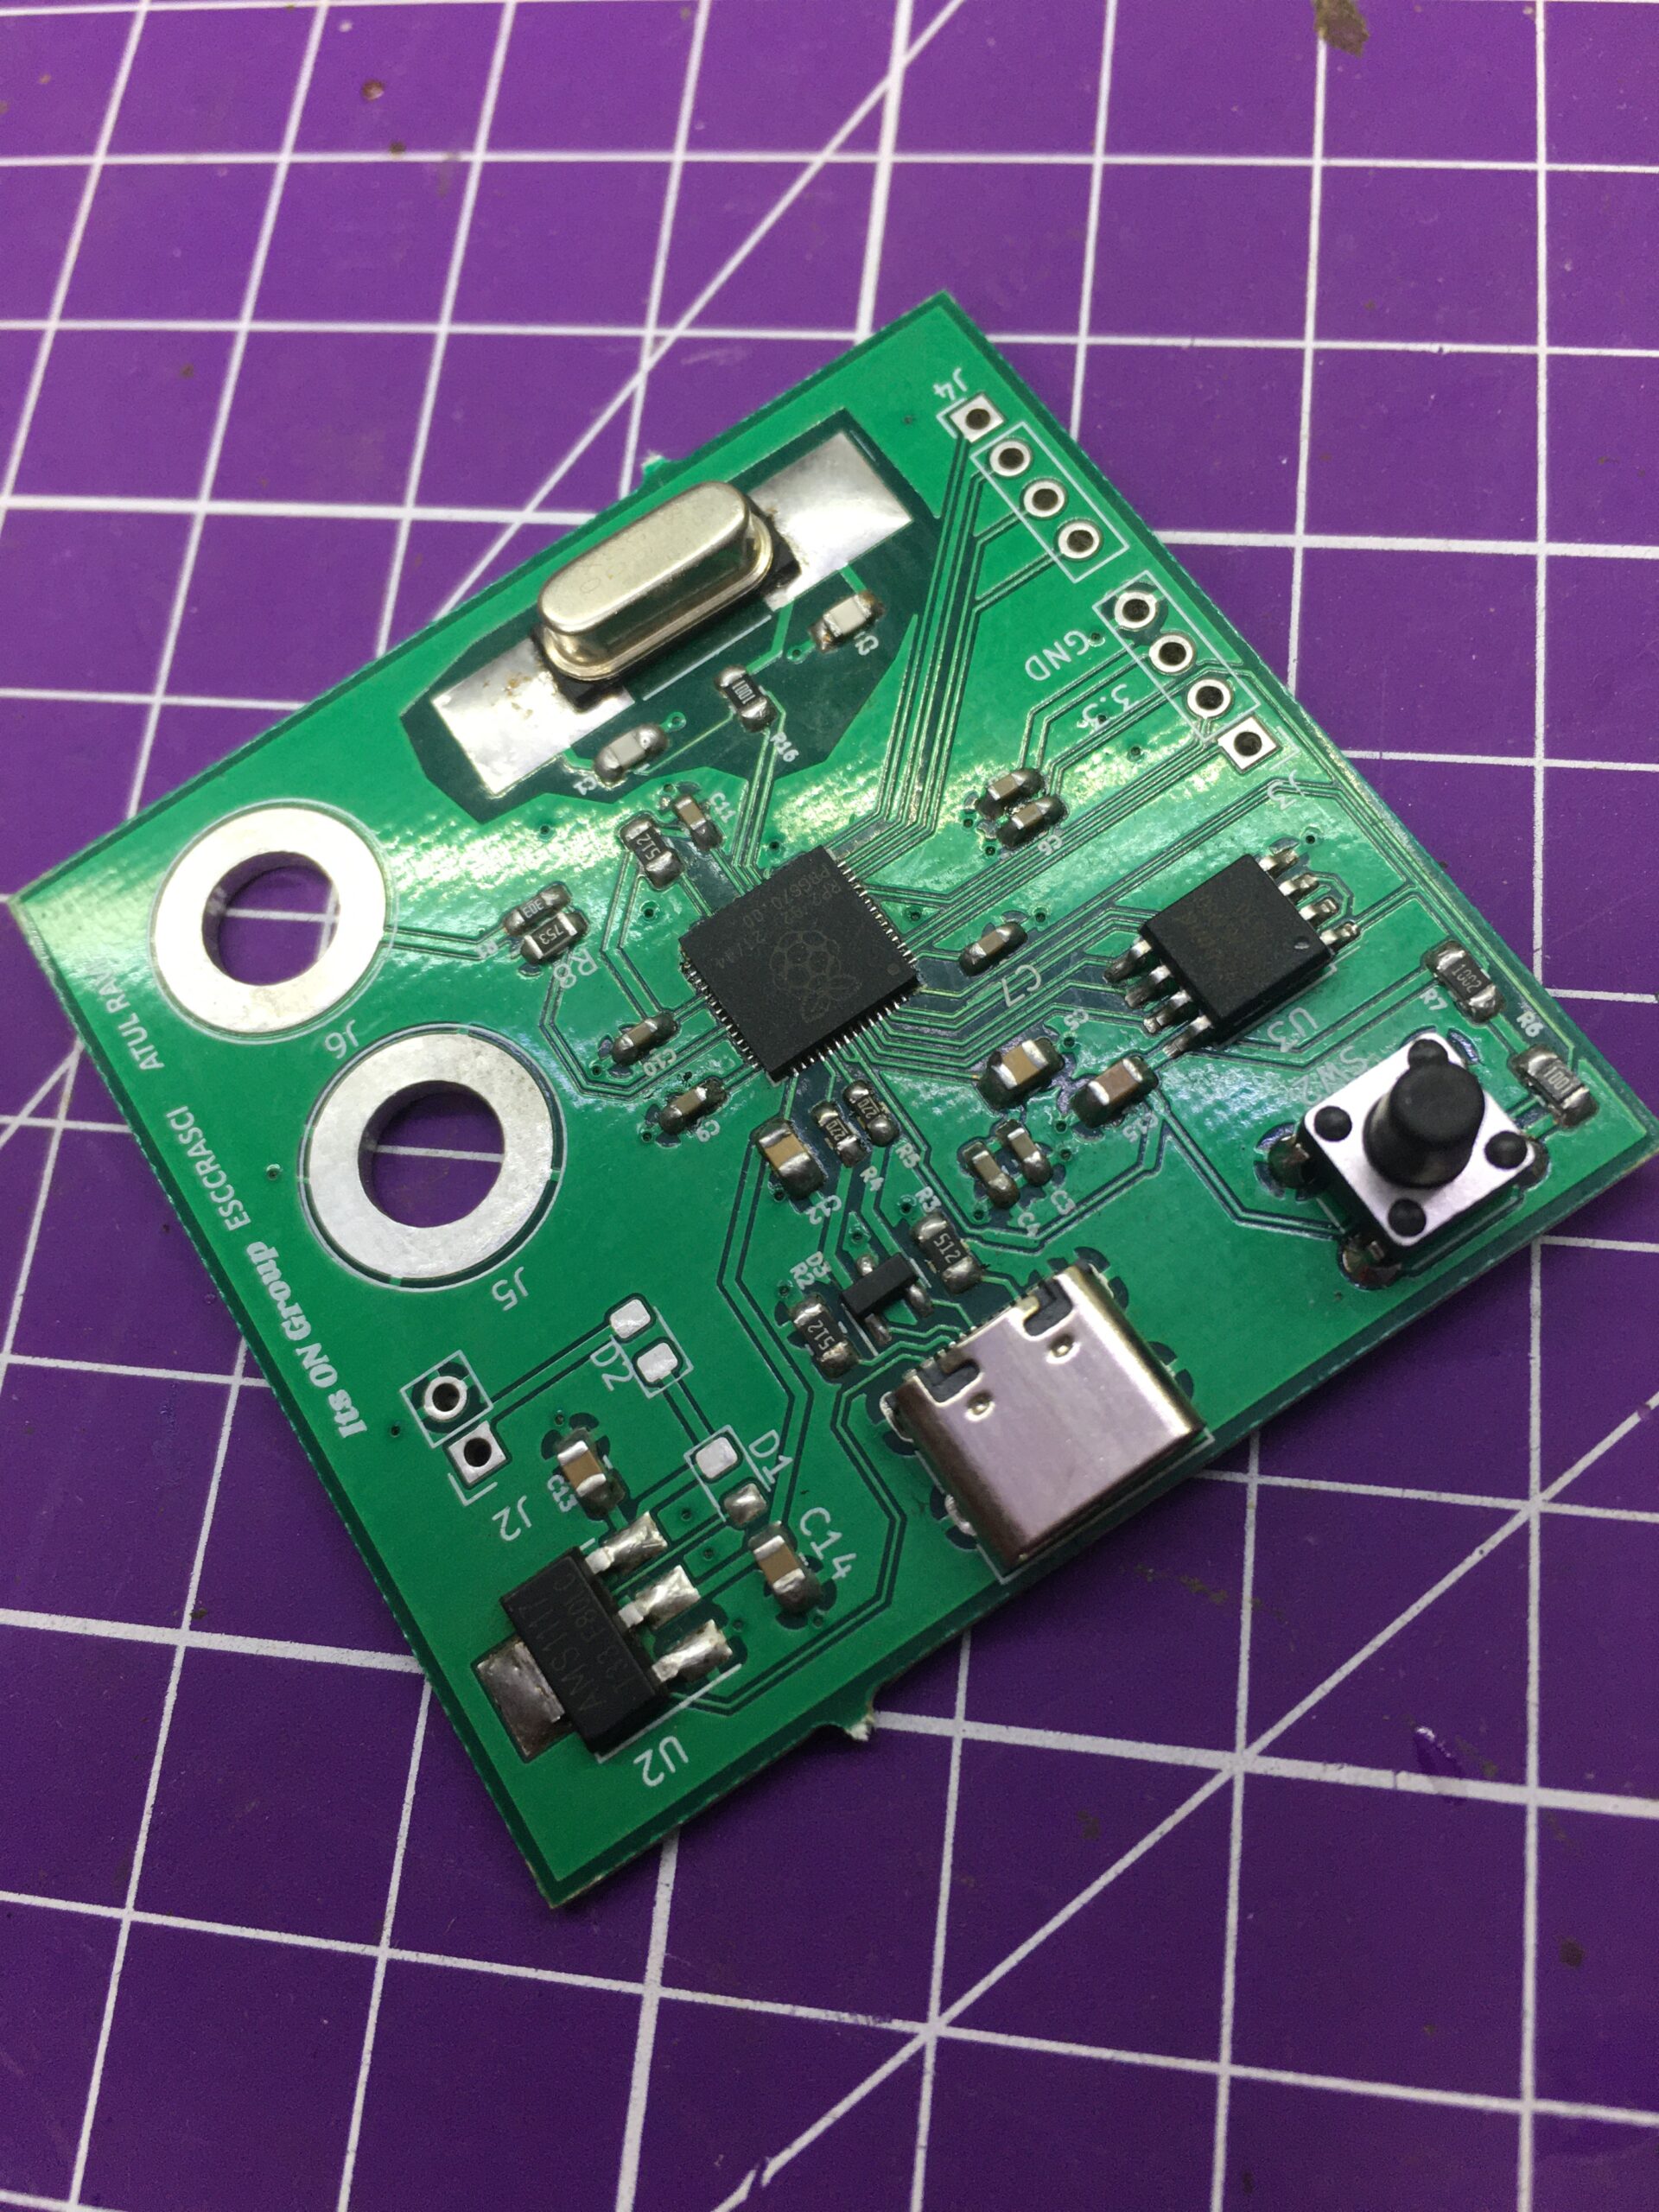 Building a board with the RP2040